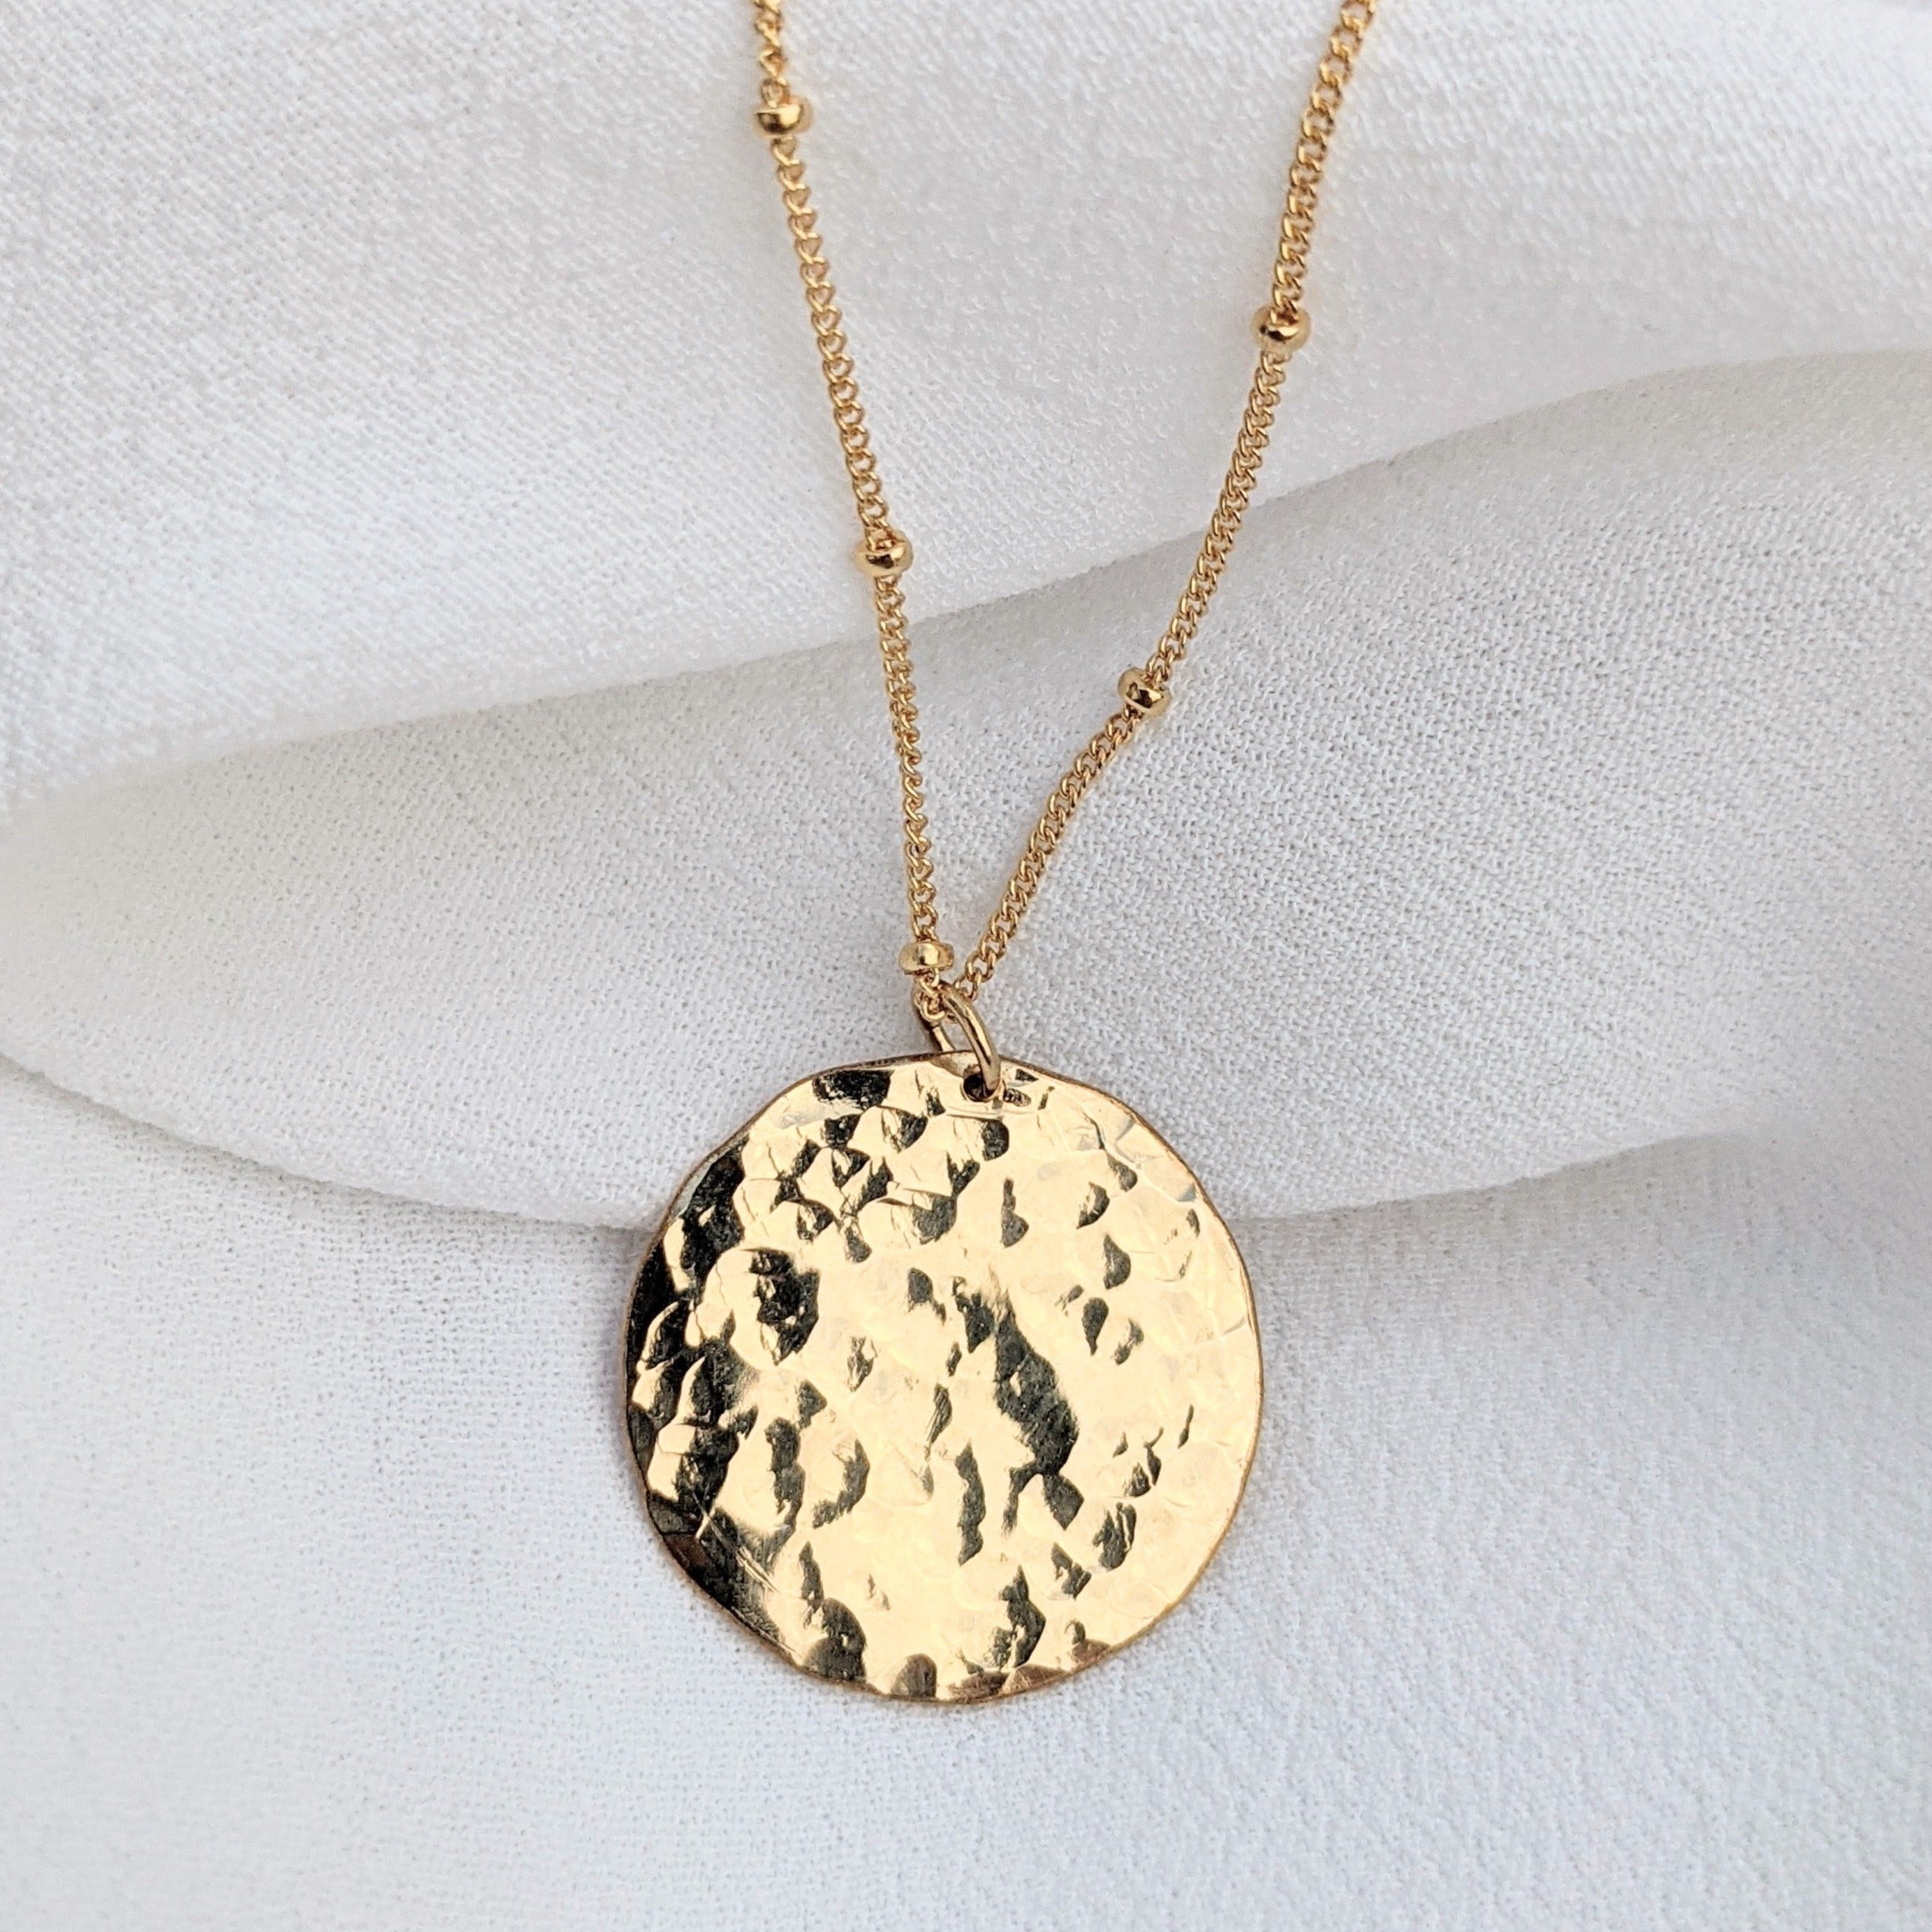 Large gold filled hammered disc pendant necklace satellite chain coin